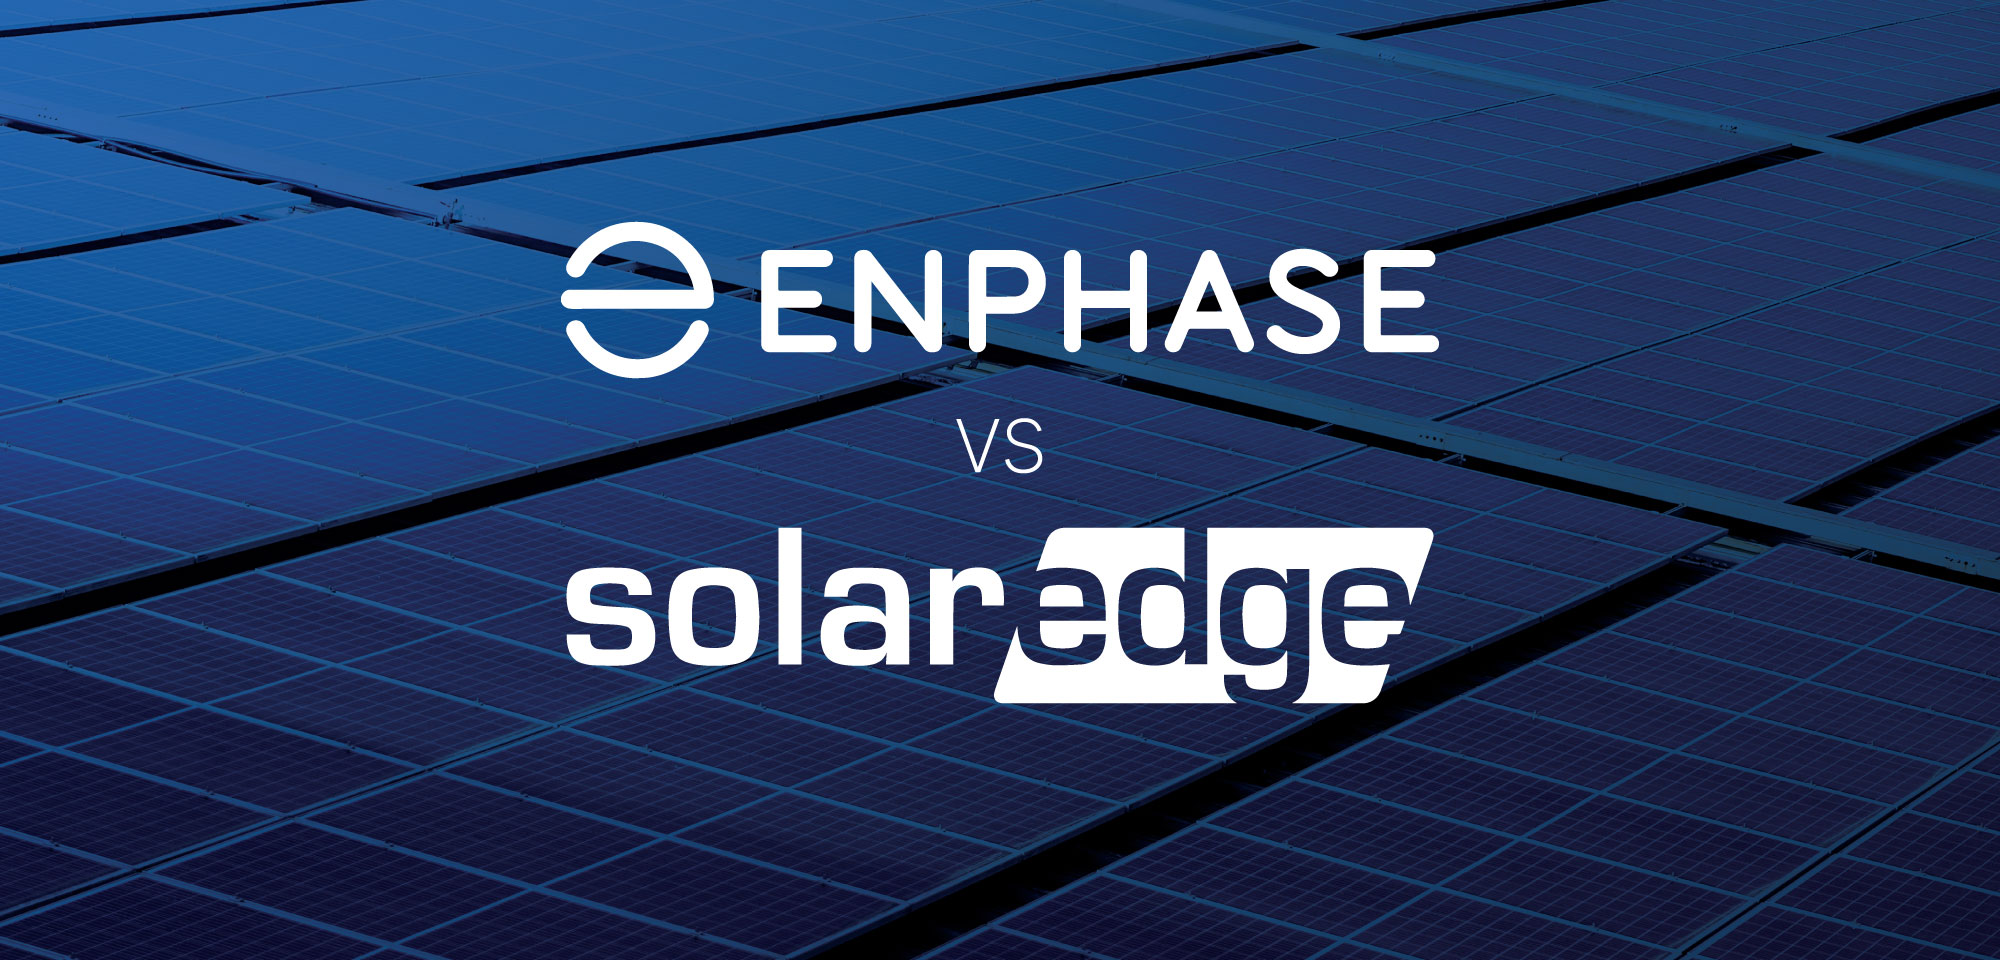 Enphase vs. SolarEdge: which is the best choice for your home solar system?